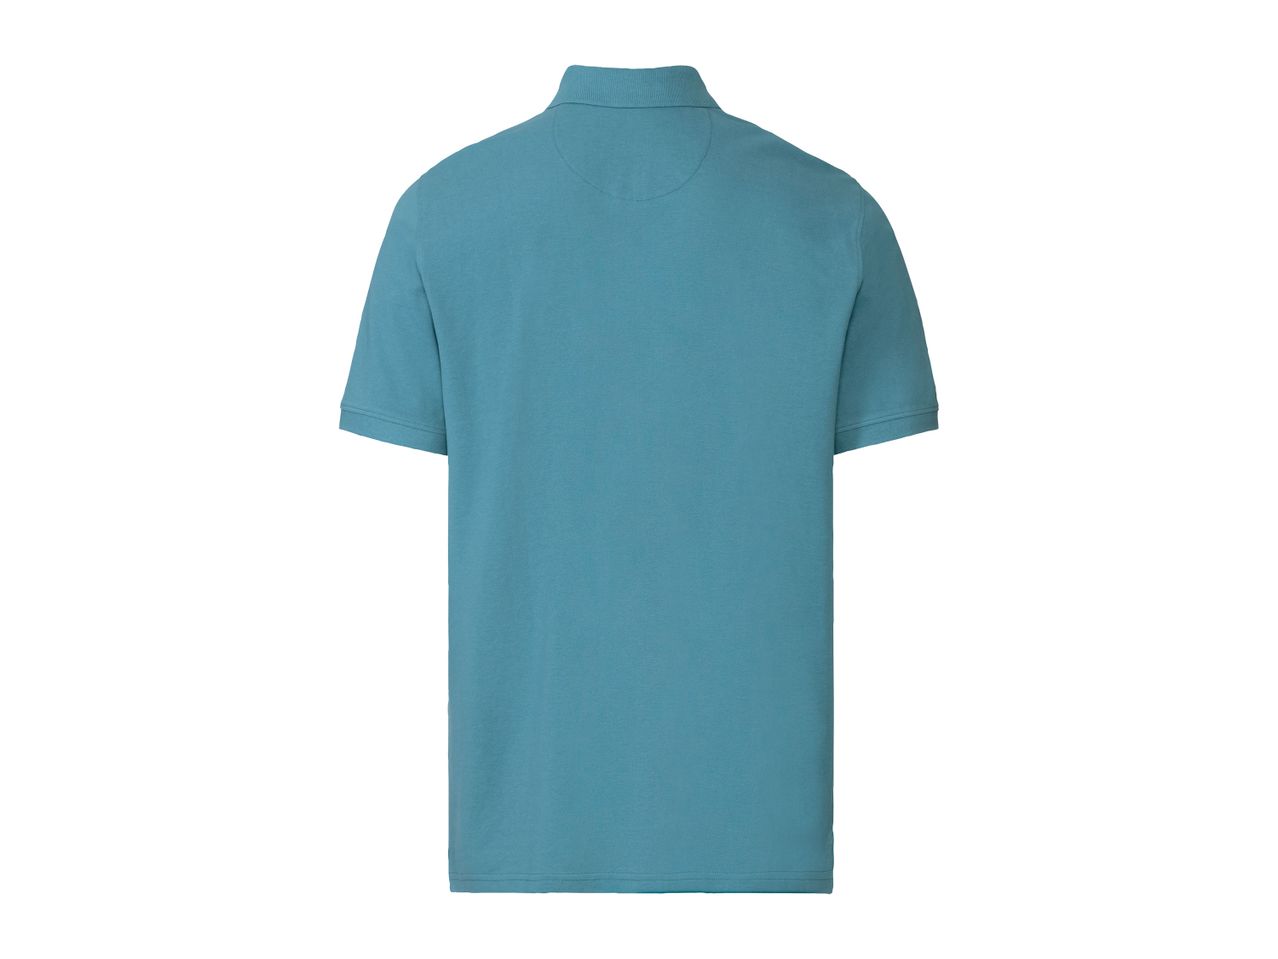 Go to full screen view: Men’s Polo Shirt - Image 10